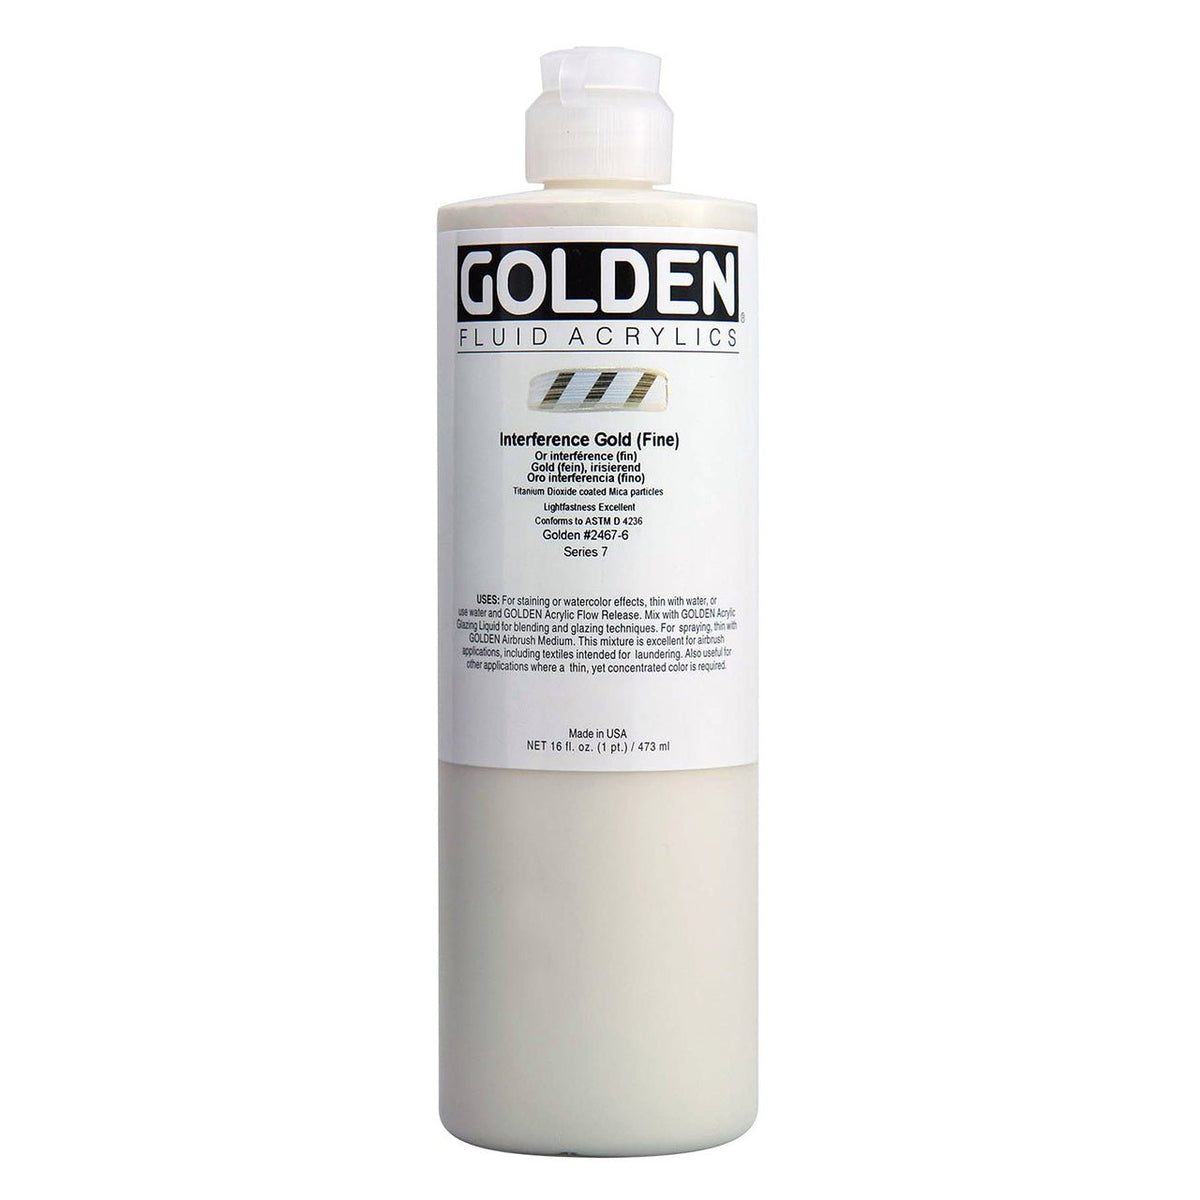 Golden Fluid Acrylic Interference Gold (fine) 16 oz - merriartist.com